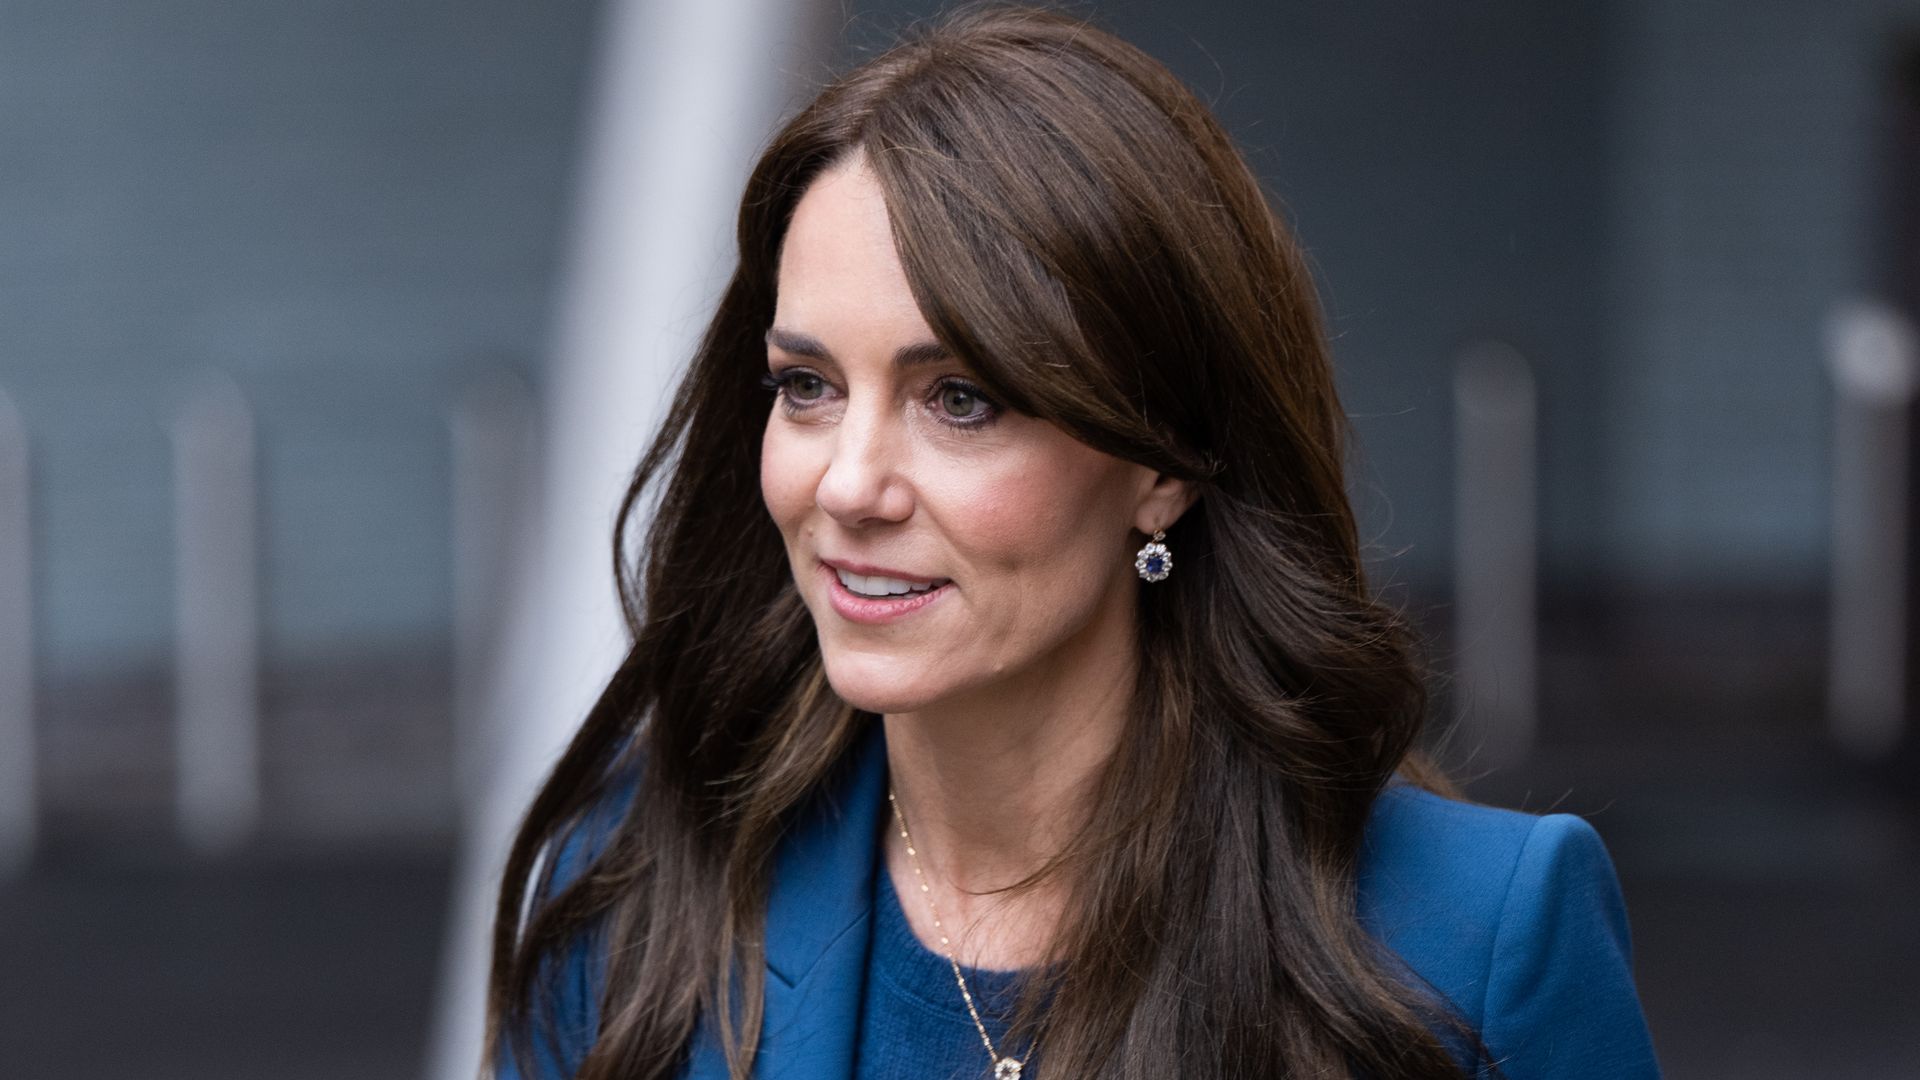 Princess Kate likely to miss these major events while recovering from surgery